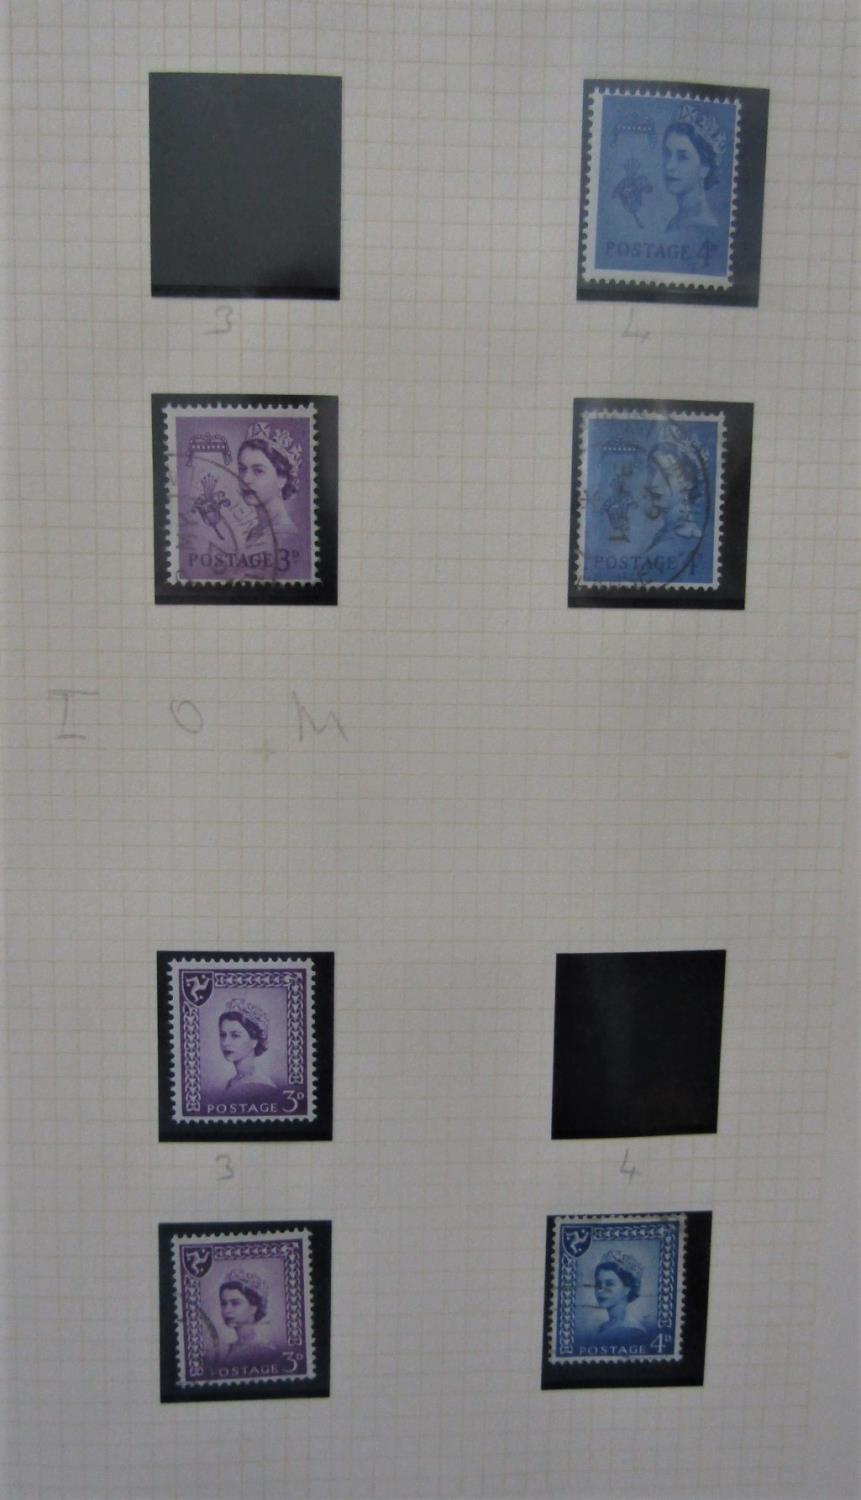 Two boxes of GB and Worldwide stamps in albums, stockbooks, boxes, etc